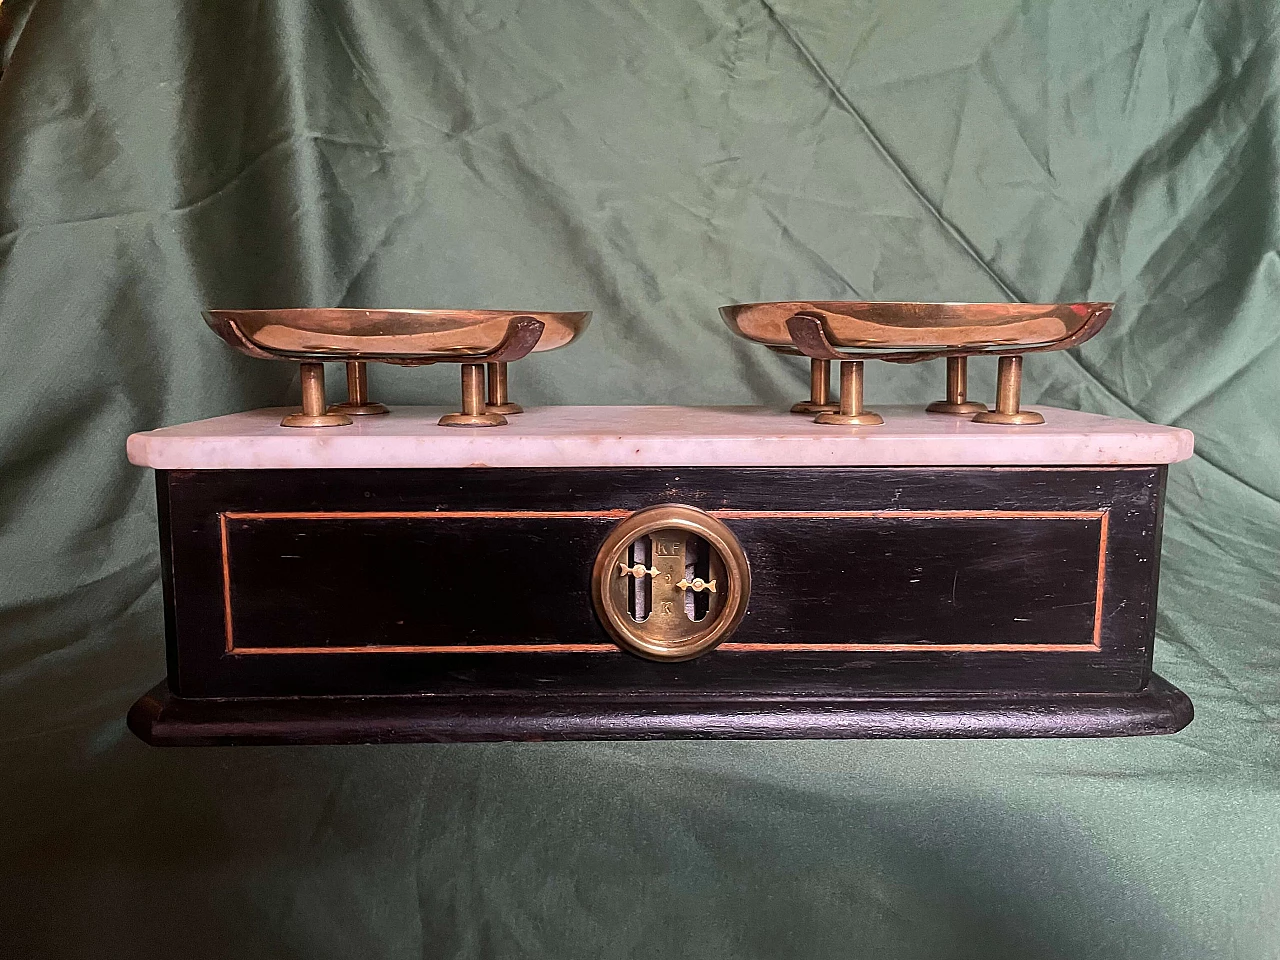 Two-plate scales made of brass, wood and marble, 1920s 6